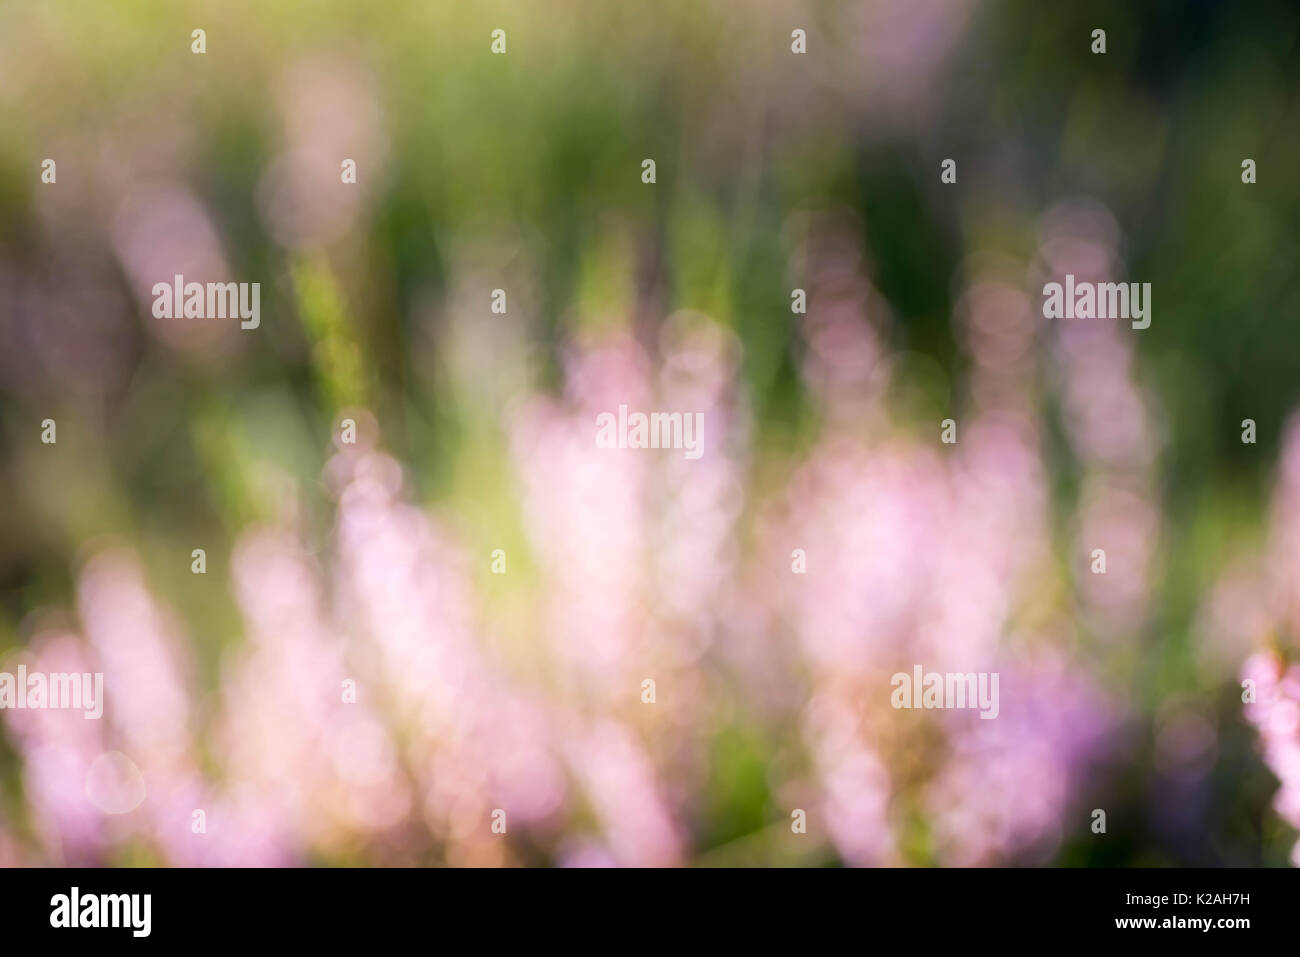 blurred nature background heather violet flowers flowers Stock Photo